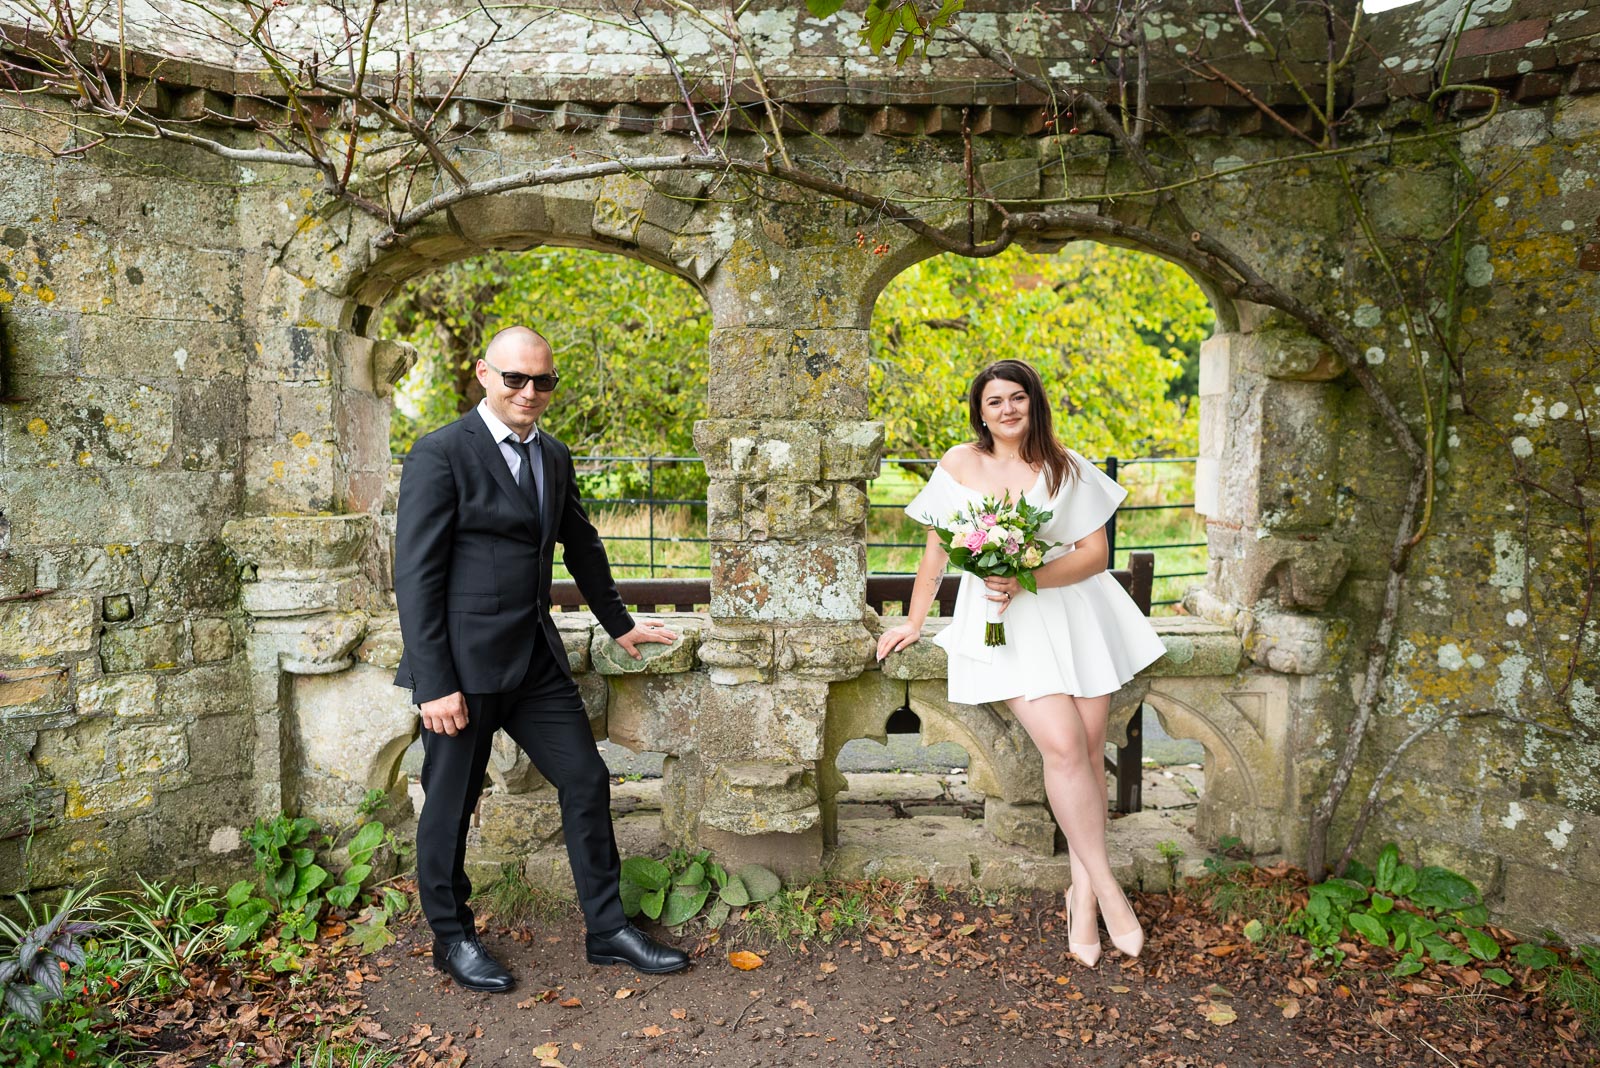 Maria and Robert pose in the arches in Southover Grange, Lewes after their wedding. 